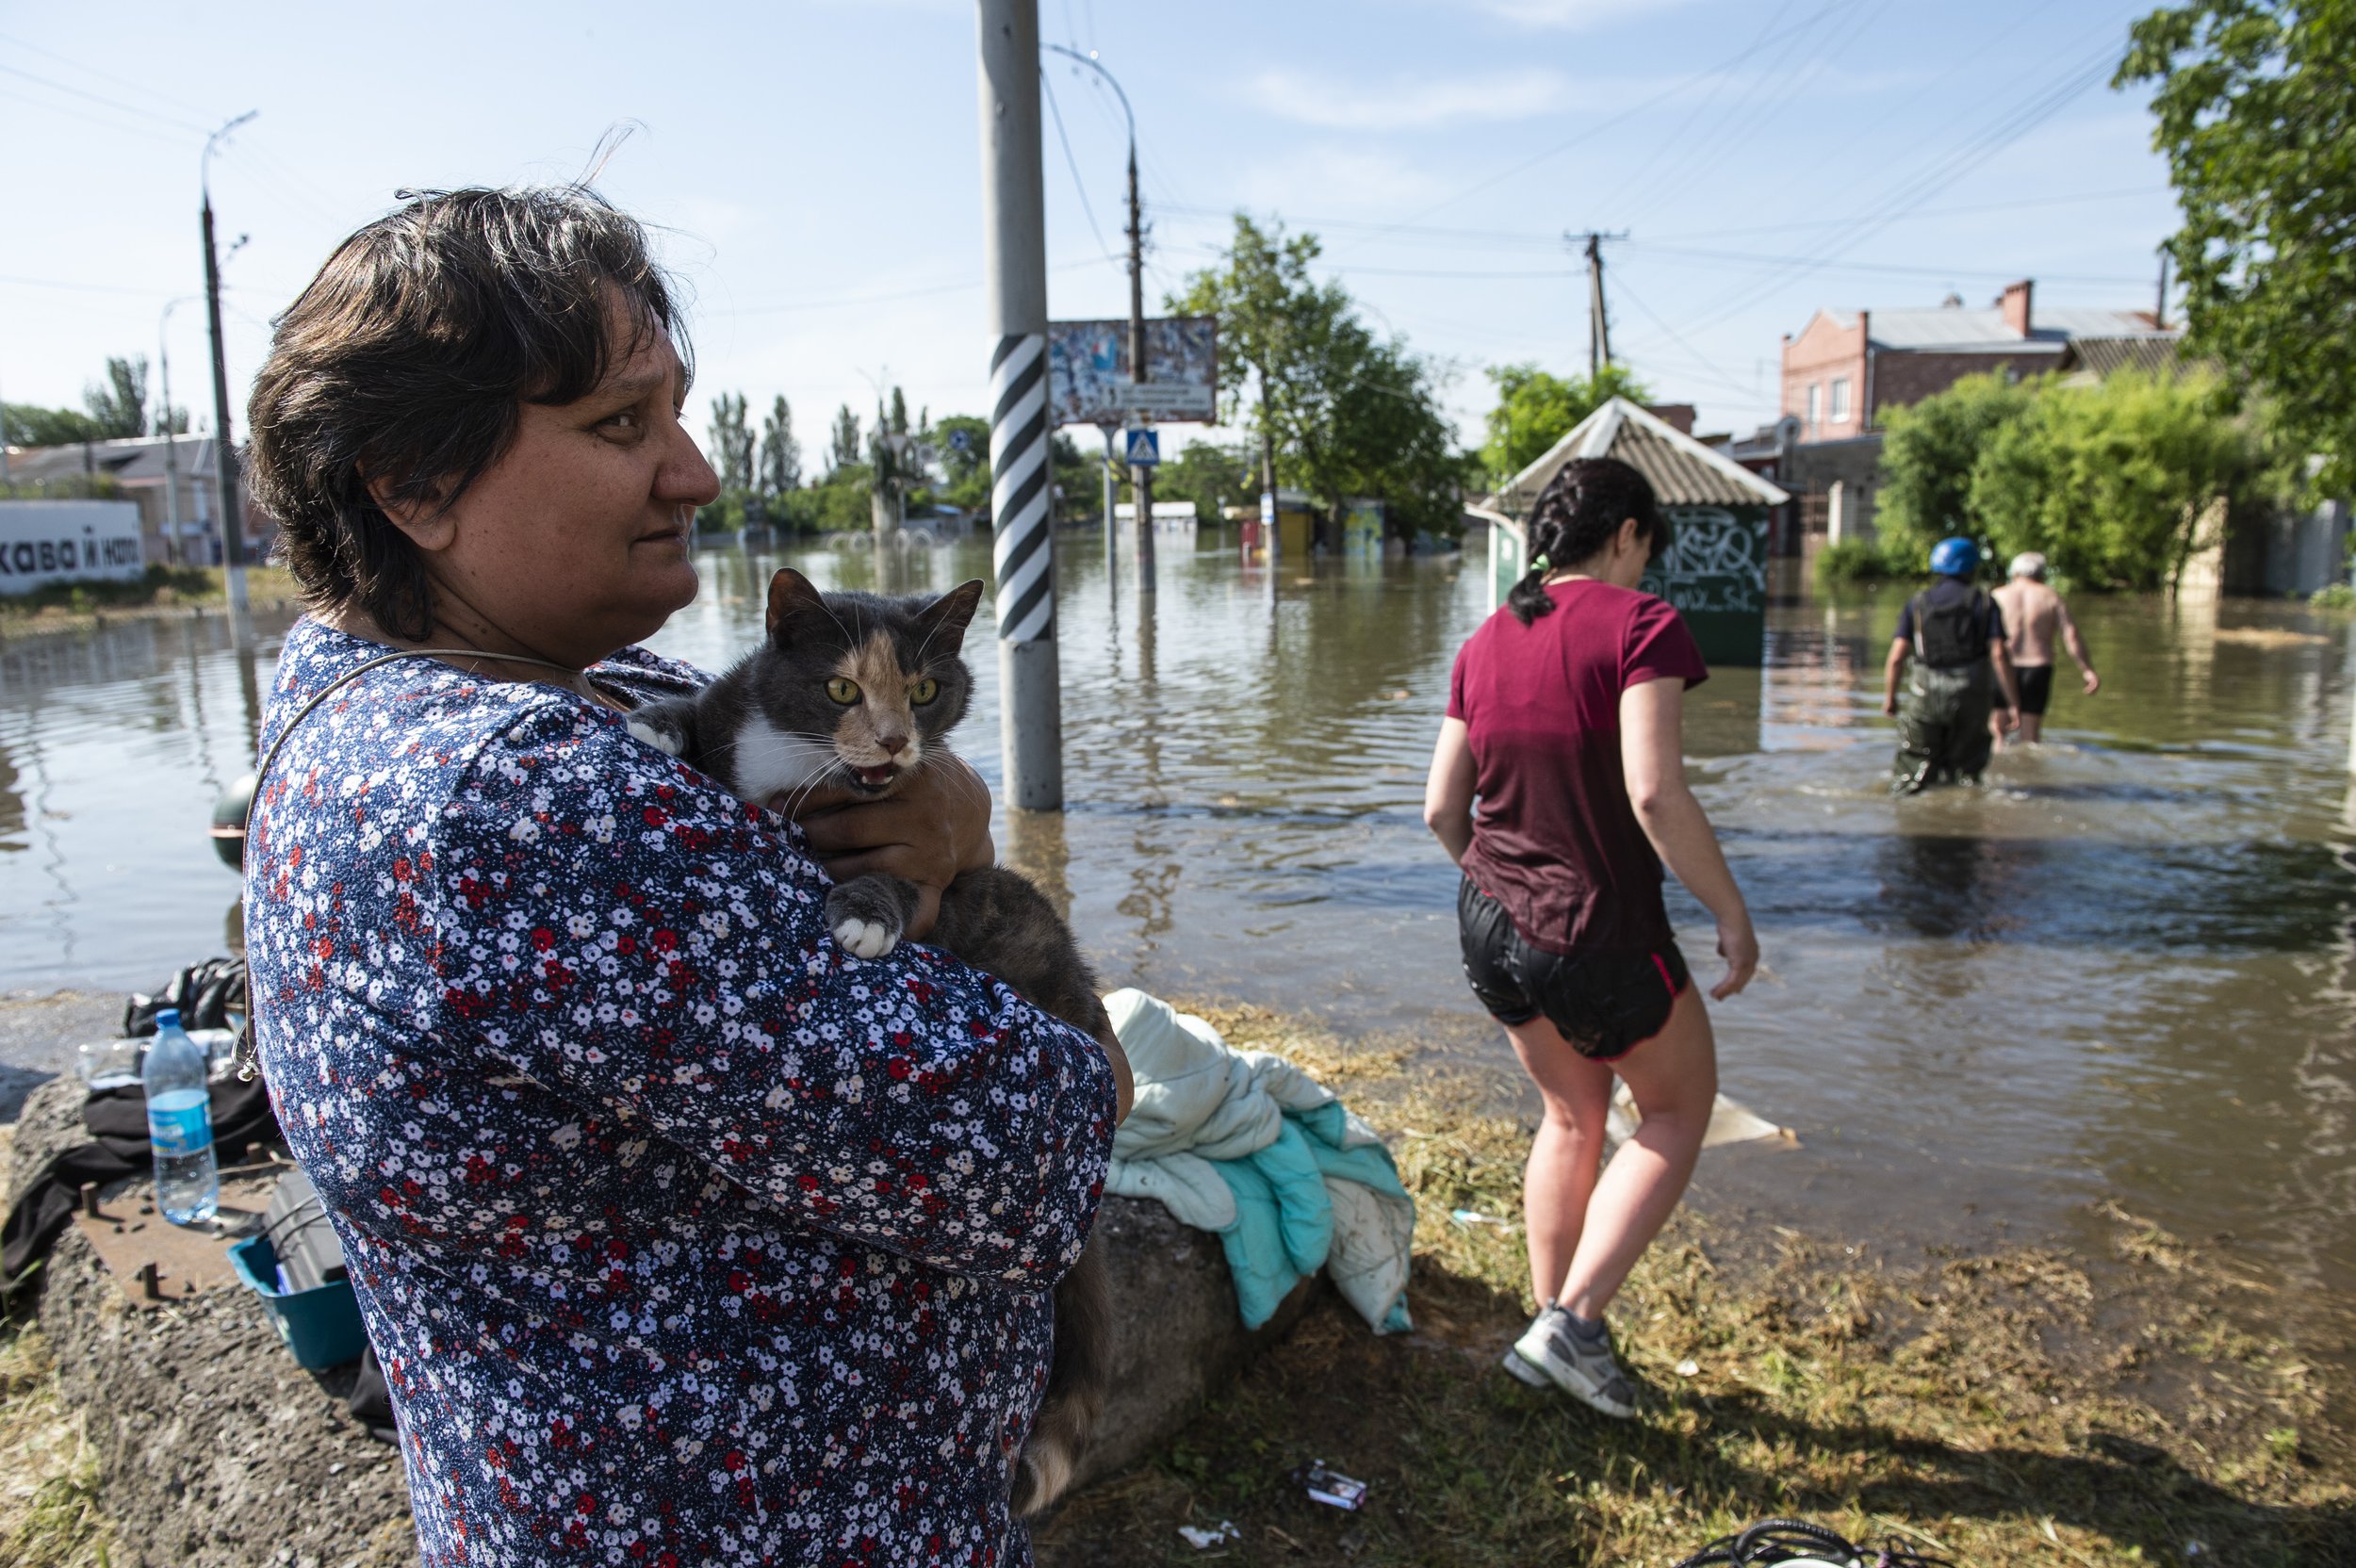  A woman embraces her pet cat as rescue workers and residents work to save belonging and look for survivors after flood waters inundated neighborhoods along the Dnipro River in Kherson, Ukraine on June 7, 2023. On June 6, 2023, Russian forces destroy